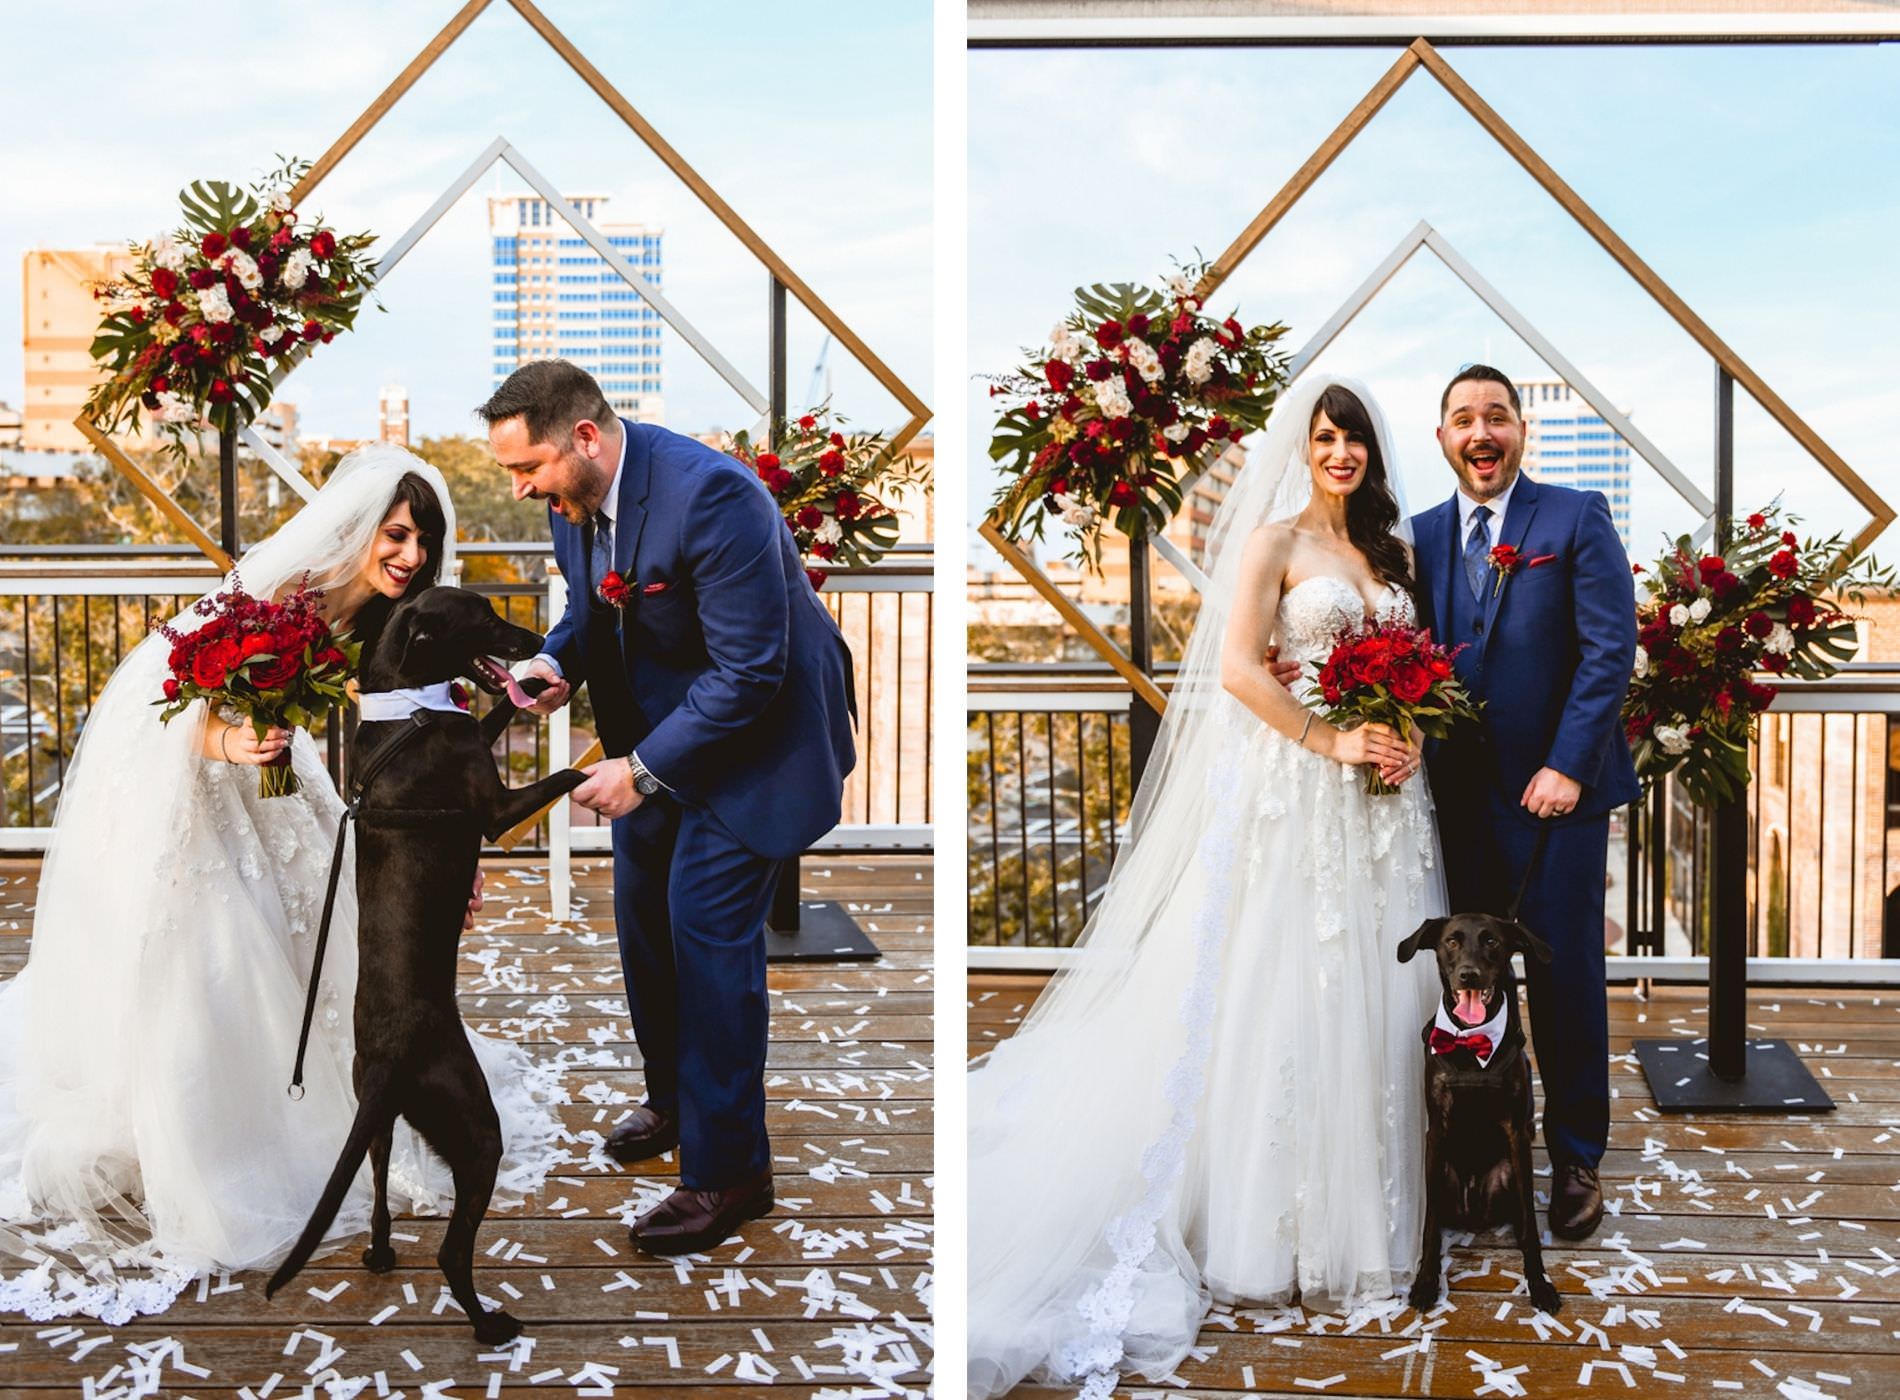 Florida Bride in Essense of Australia Strapless A-Line Wedding Dress Holding Red Floral Bouquet and Groom in Blue Suit with Dog in Red Bowtie in Front of Geometric Sculpture with Floral Arrangements | Tampa Bay Wedding Planner Special Moments Event Planning | Downtown St. Pete Rooftop Wedding Venue Red Mesa Events | Wedding Pet Planner FairyTail Pet Care